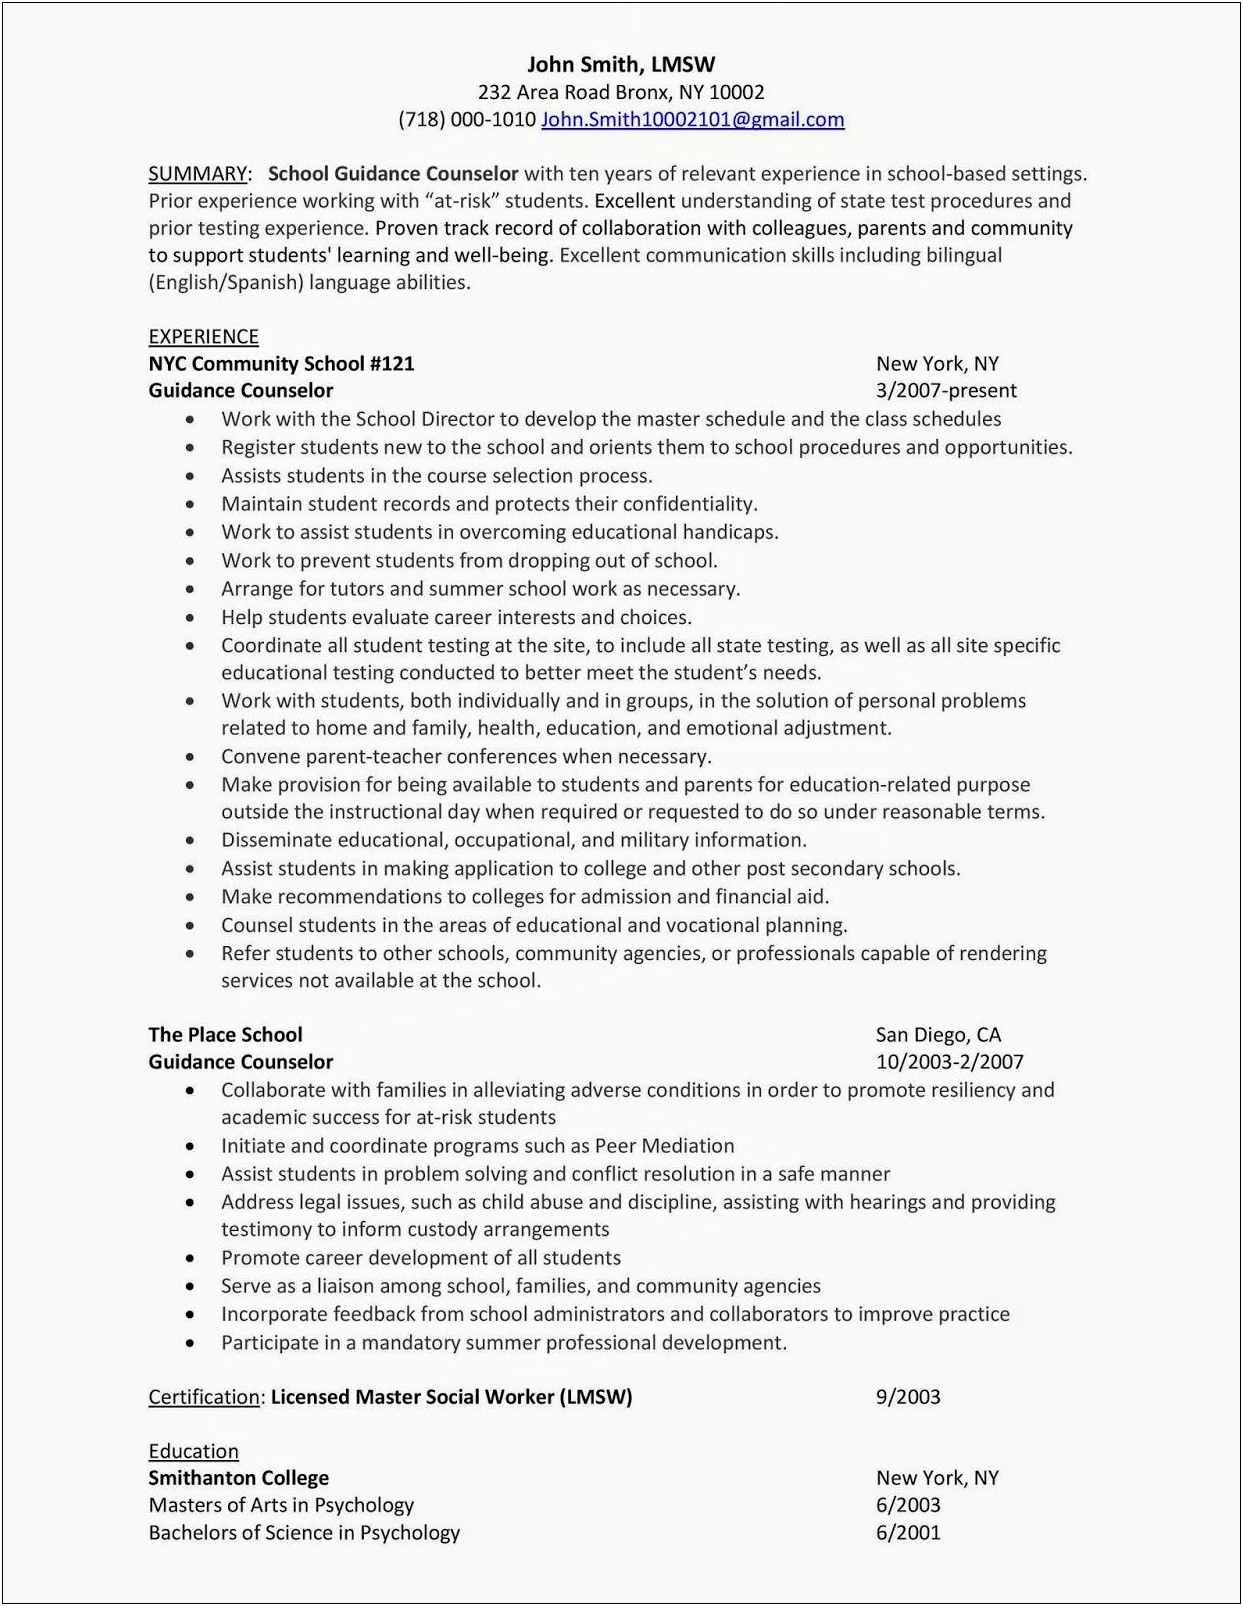 Resume For School Counseling First Job